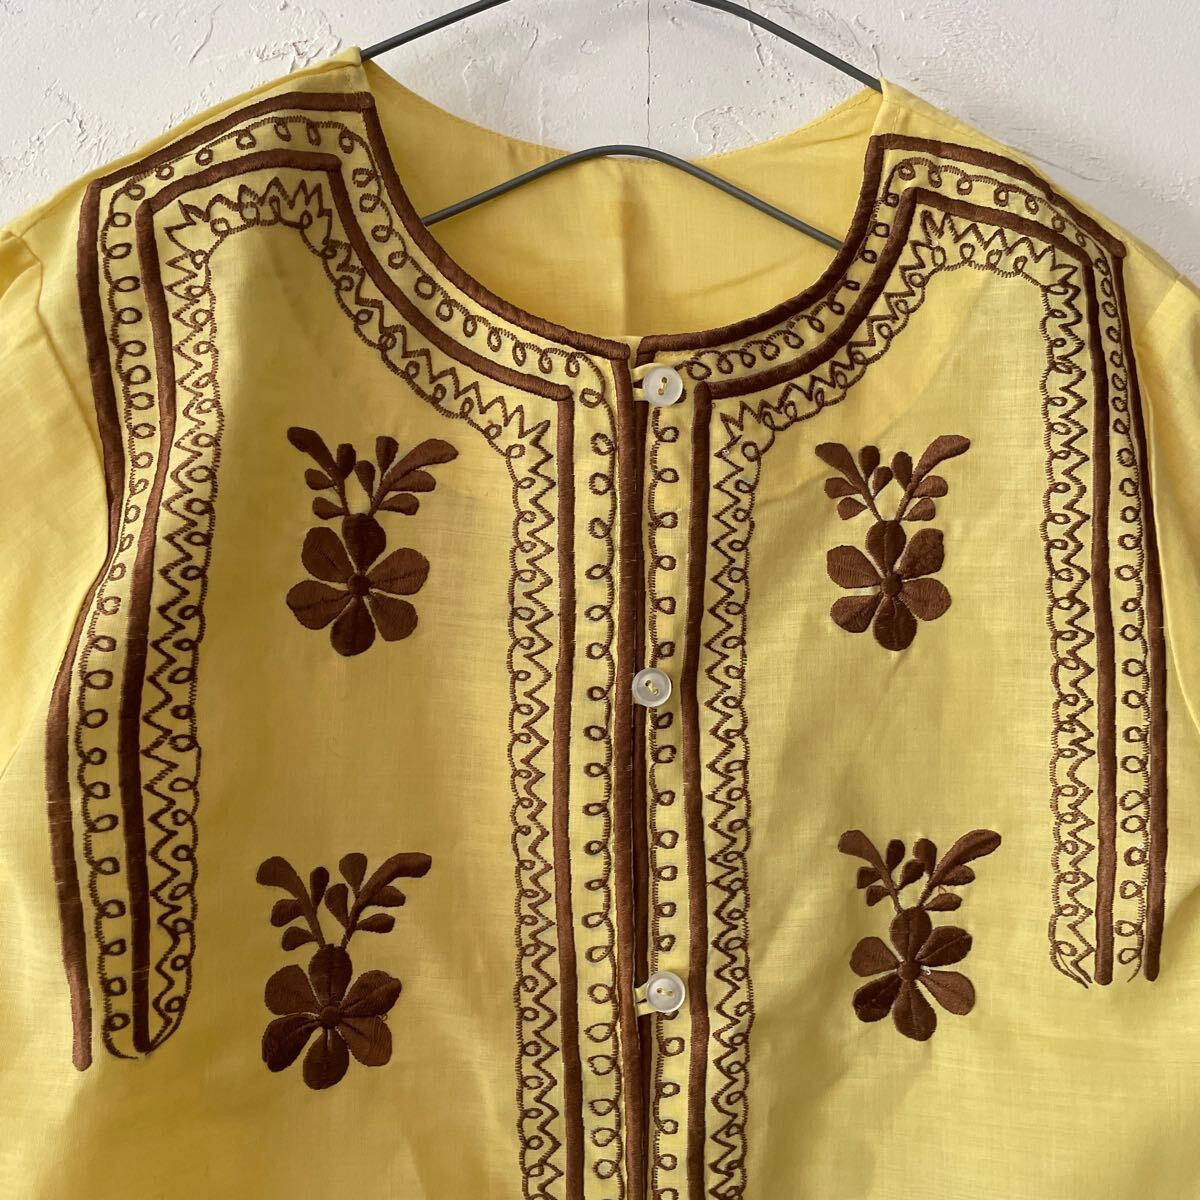  Vintage floral print embroidery shirt blouse 4 Vintage yellow Mexico yellow color old clothes no color tops 